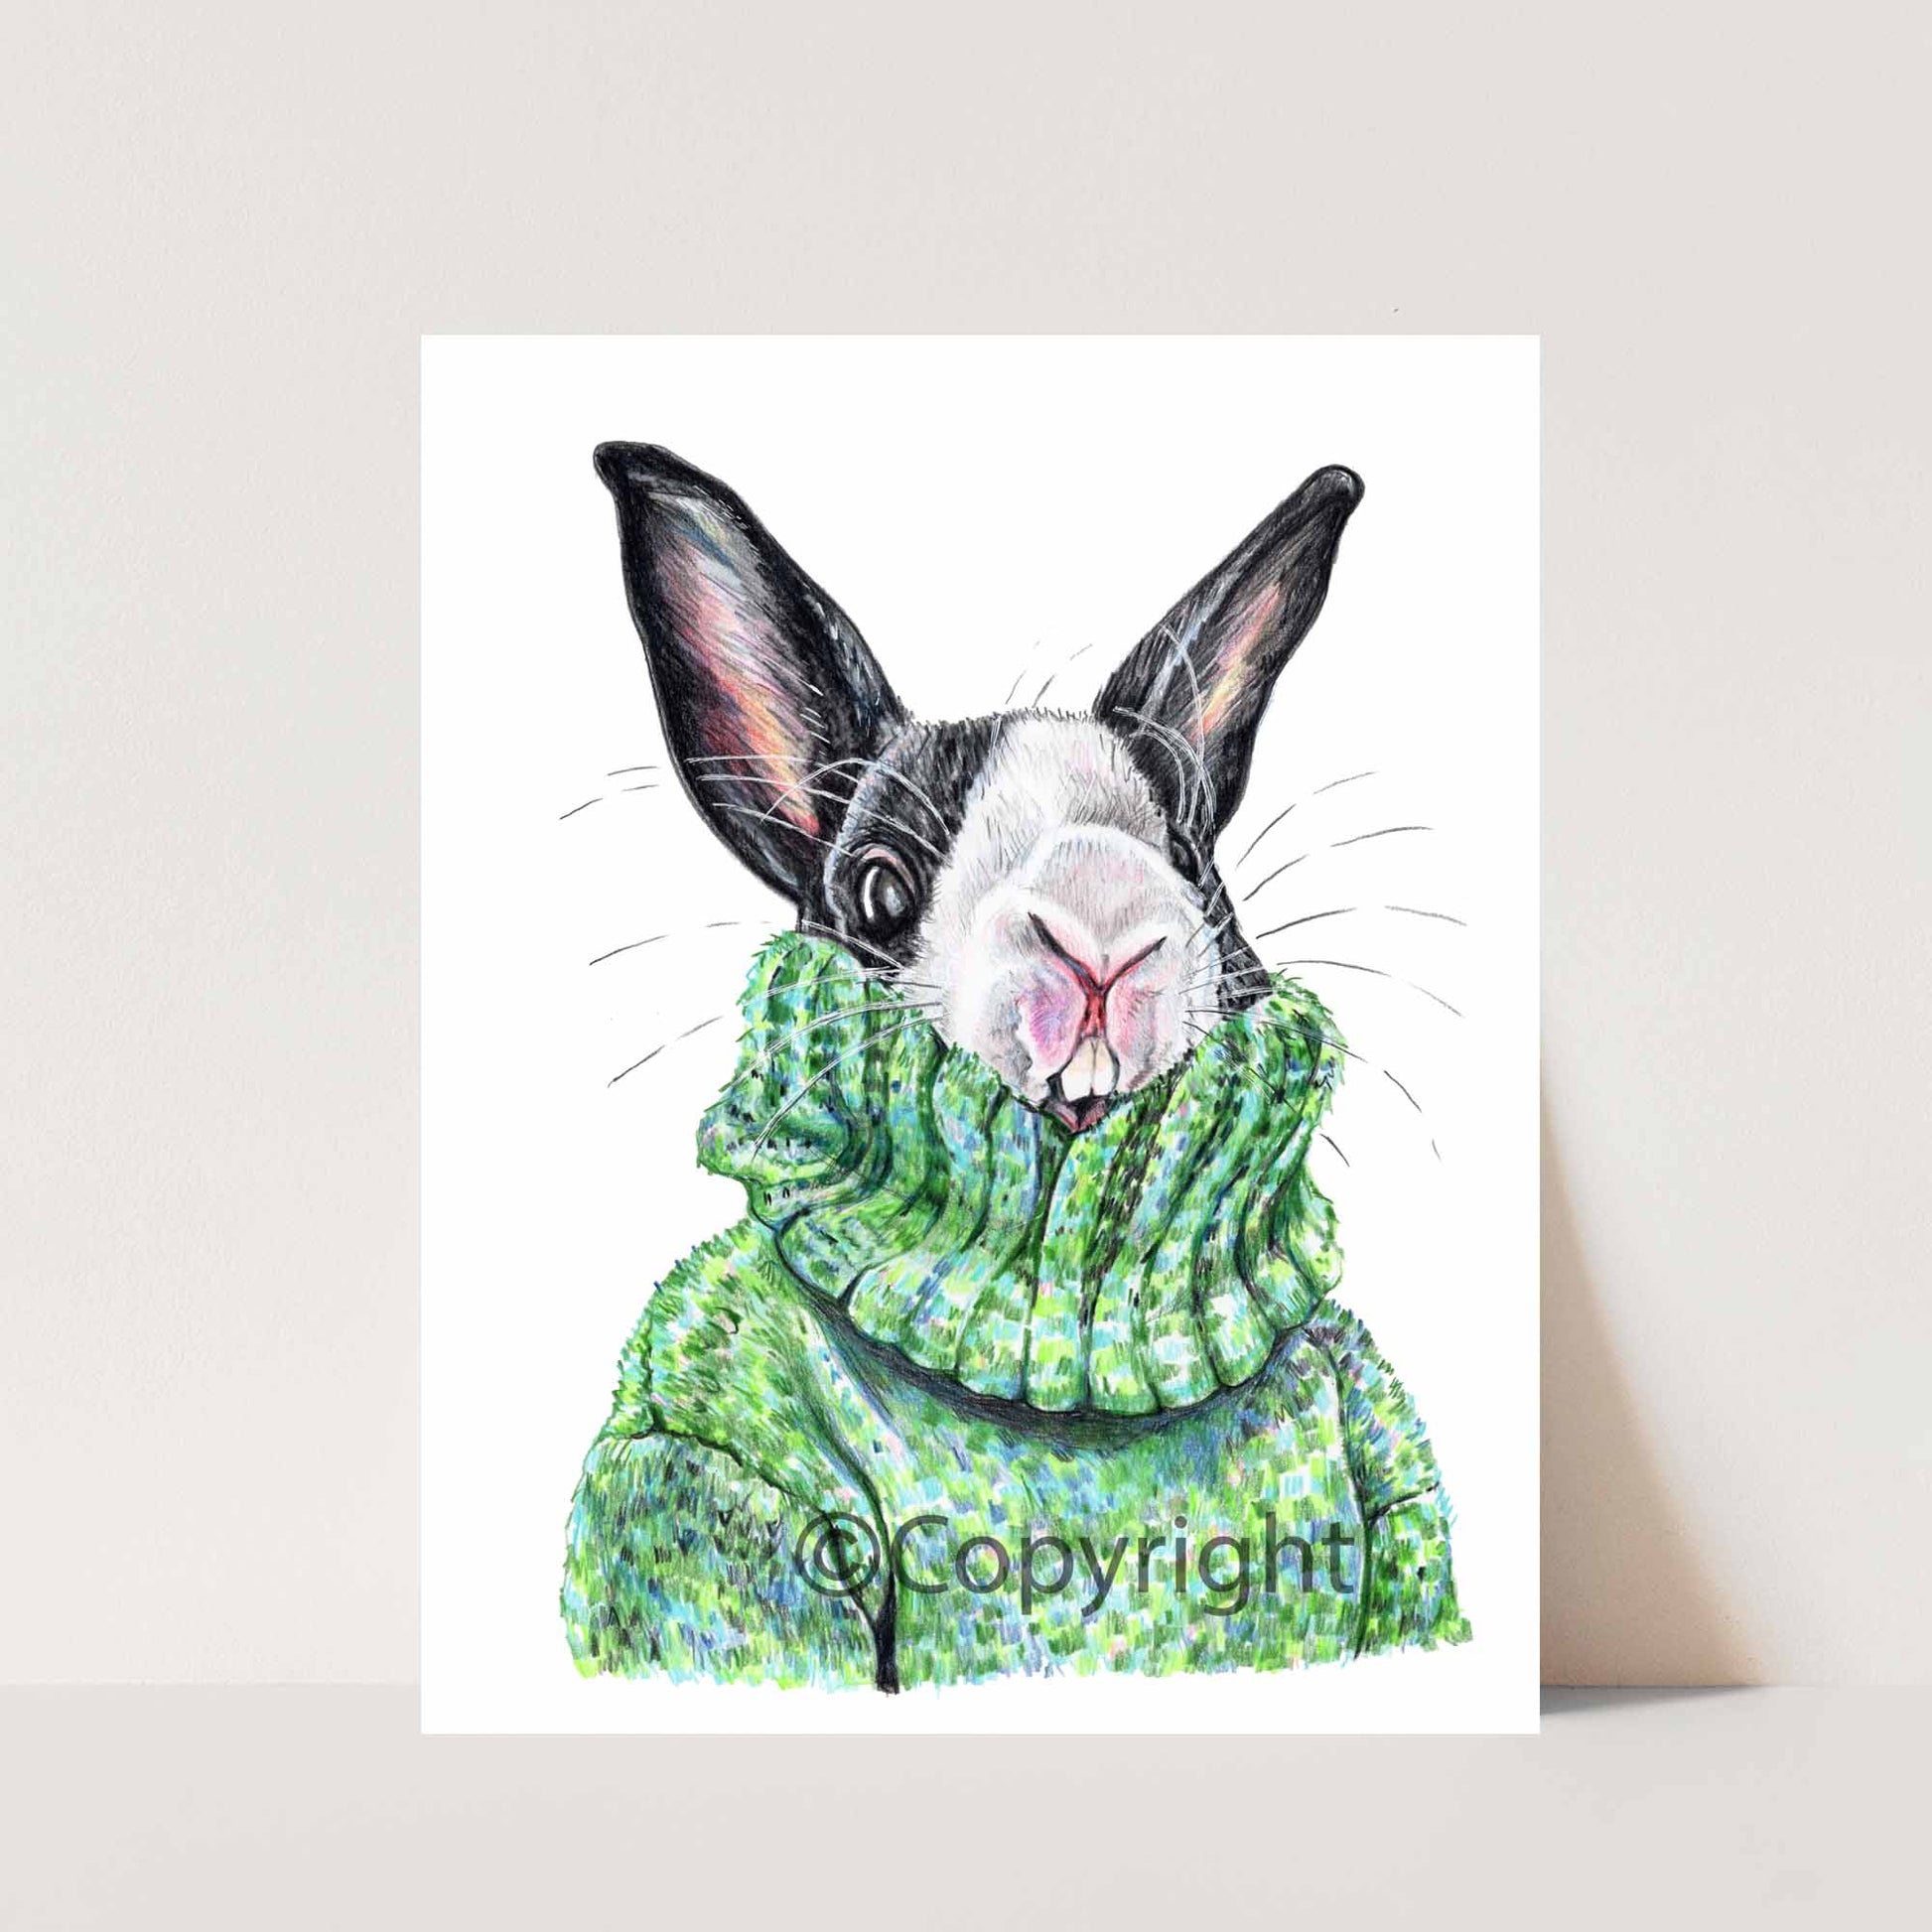 Coloured pencil drawing of a black and white bunny rabbit wearing a large green sweater. Art by Deidre Wicks